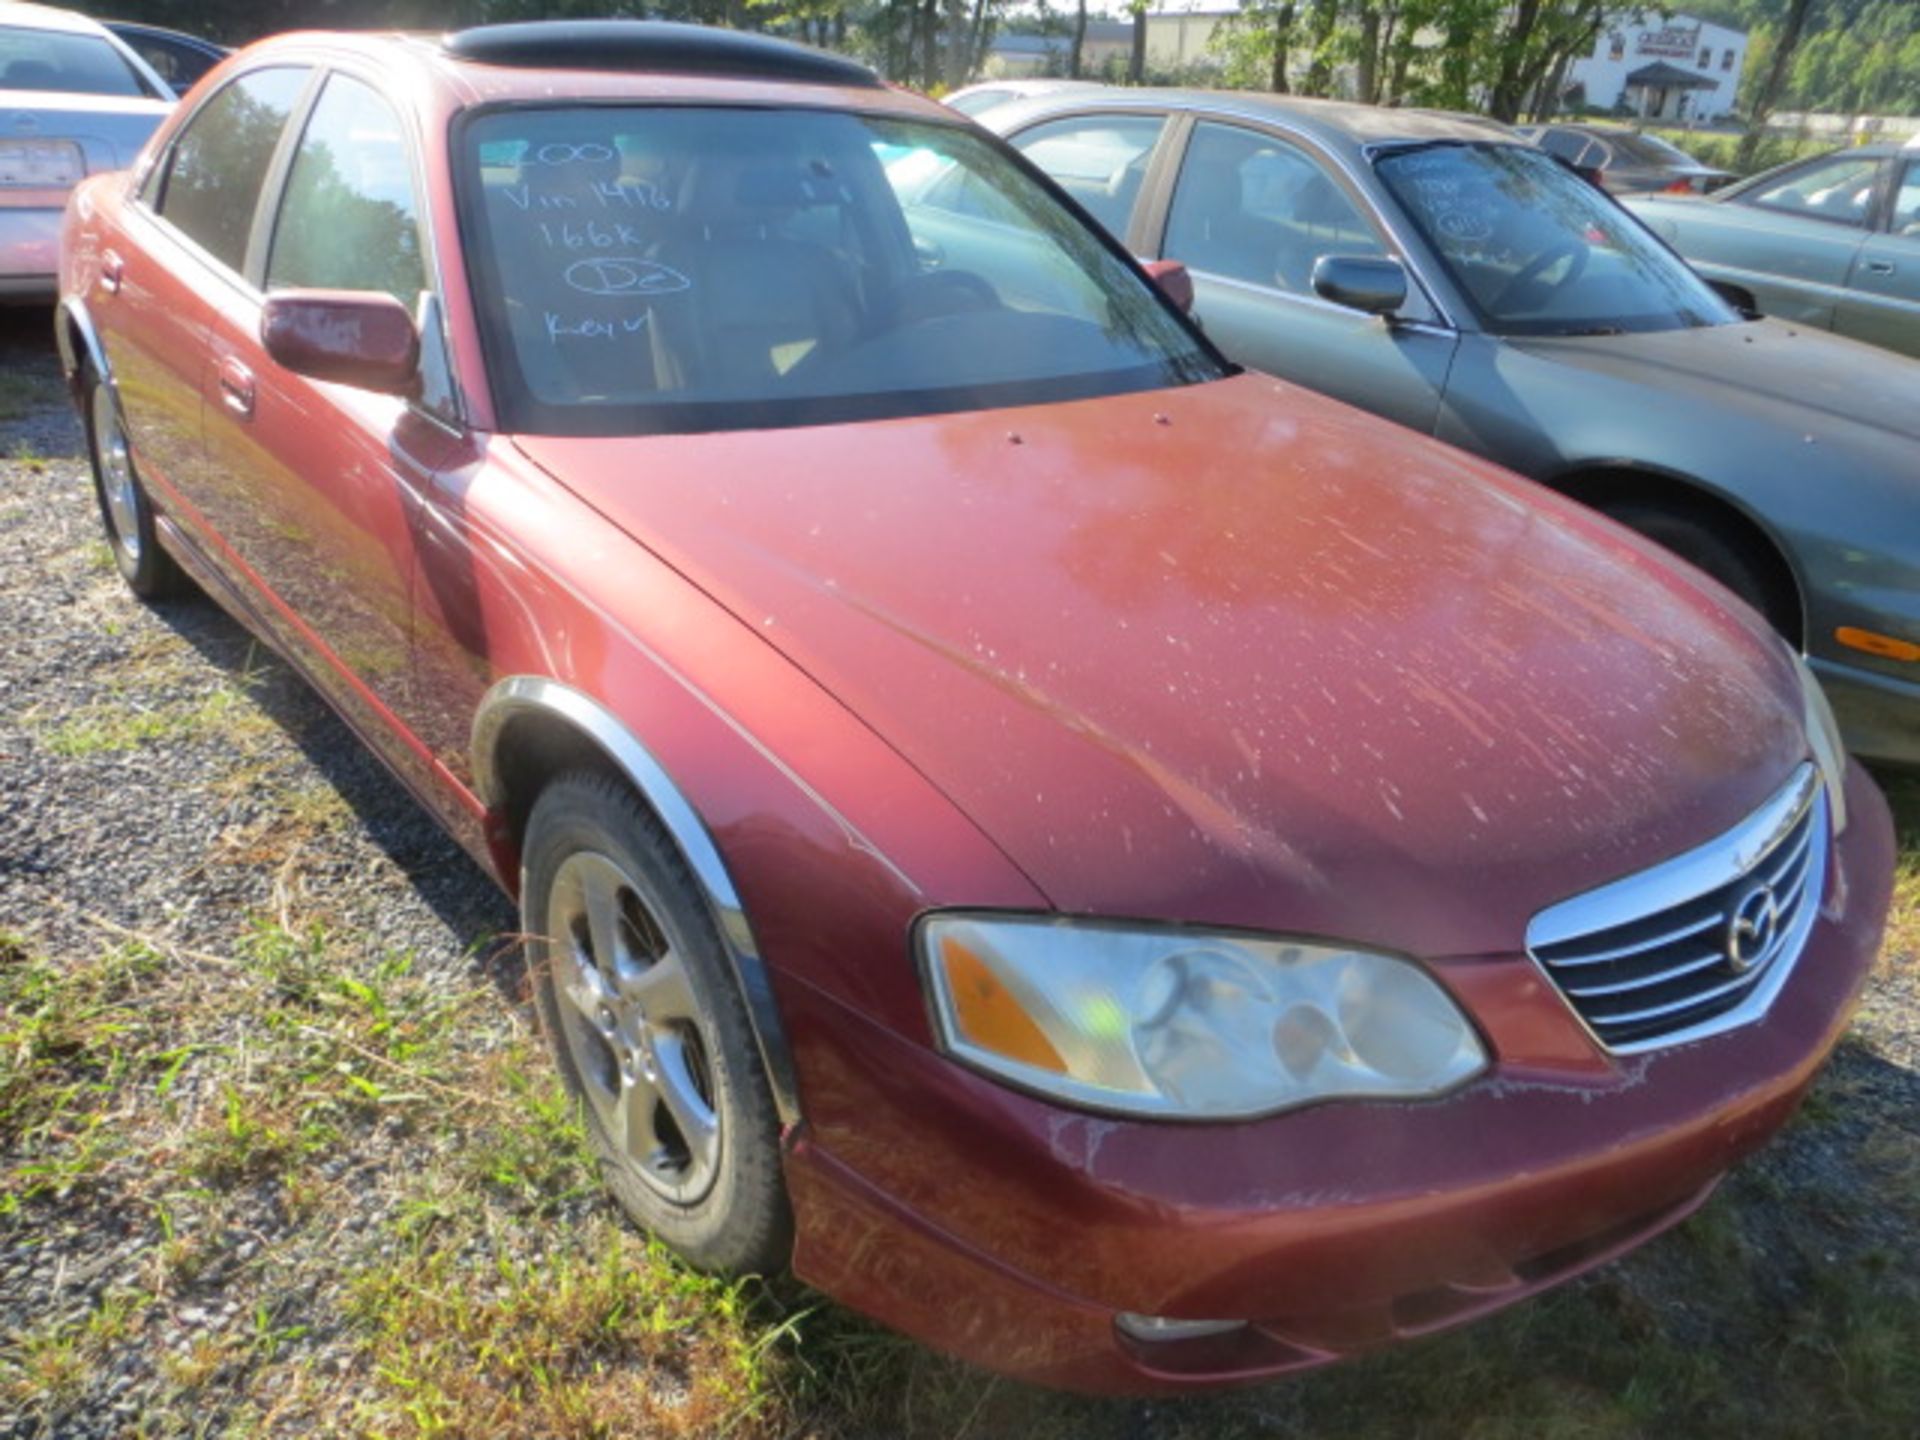 2001 Mazda Millenia-EXHAUST LEAKAGE 166000 MILES,VIN JM11A221211711416, SOLD GOOD TRANSFERABLE TITLE